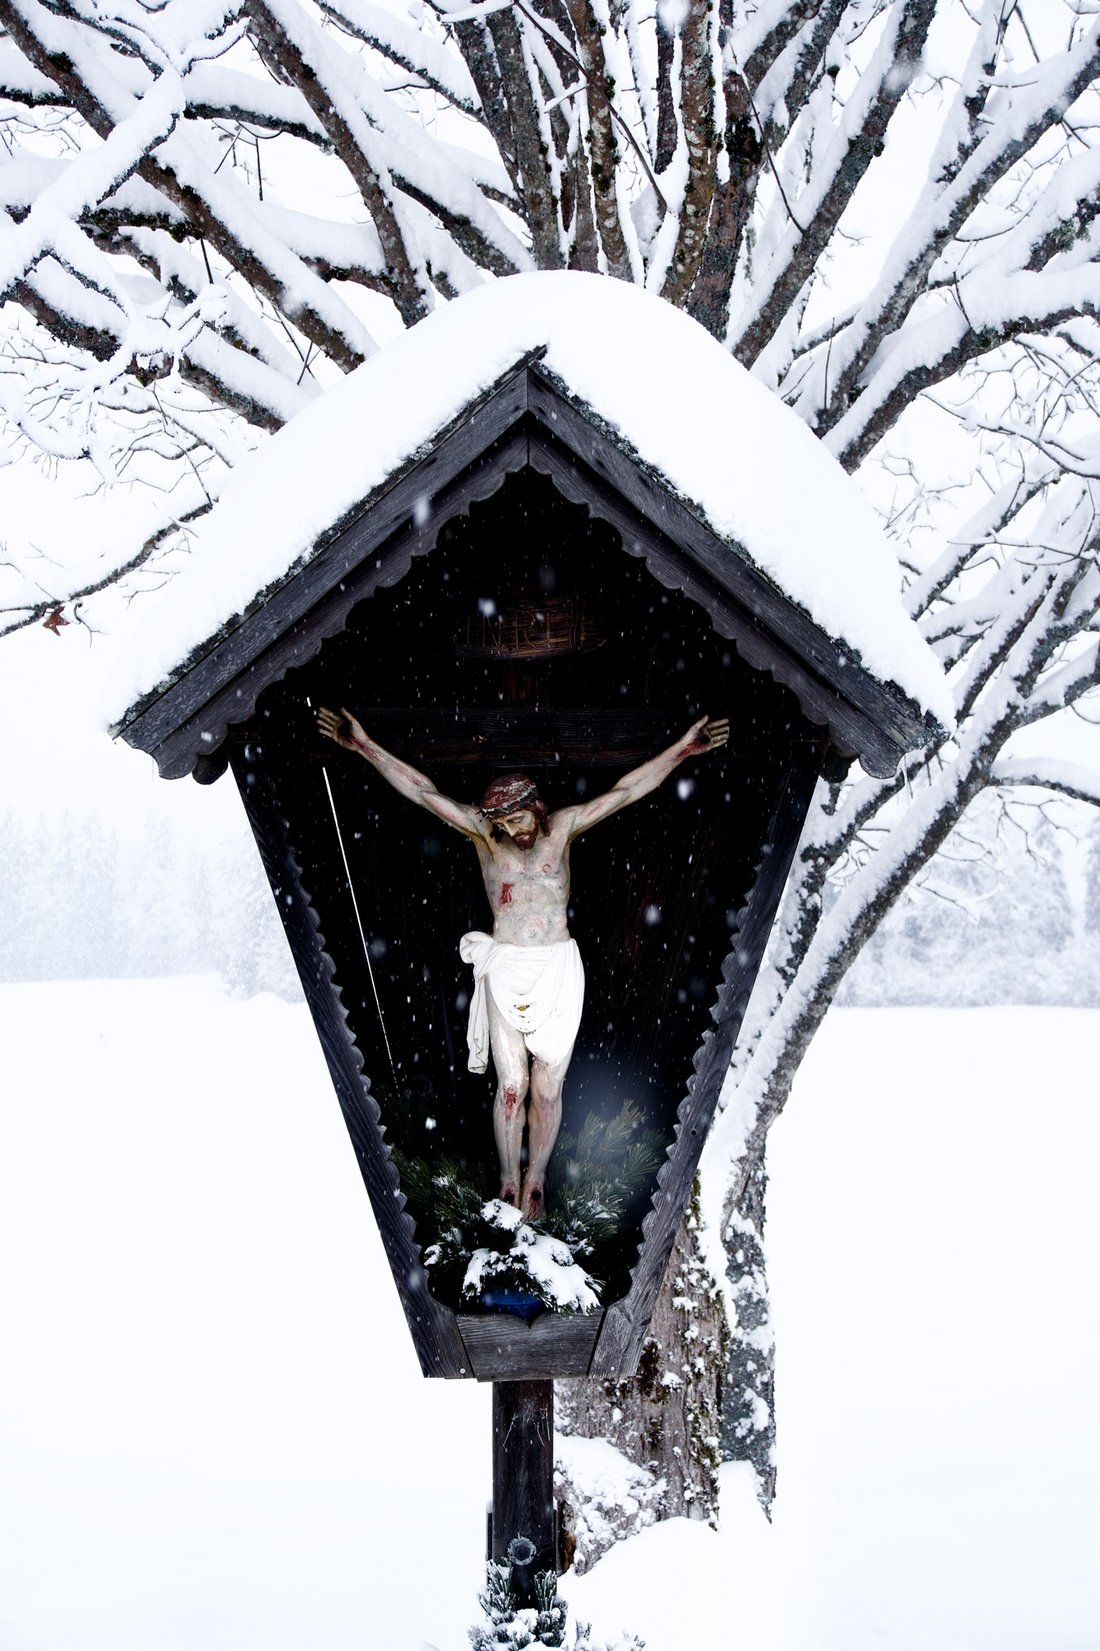 Christian cross covered in snow